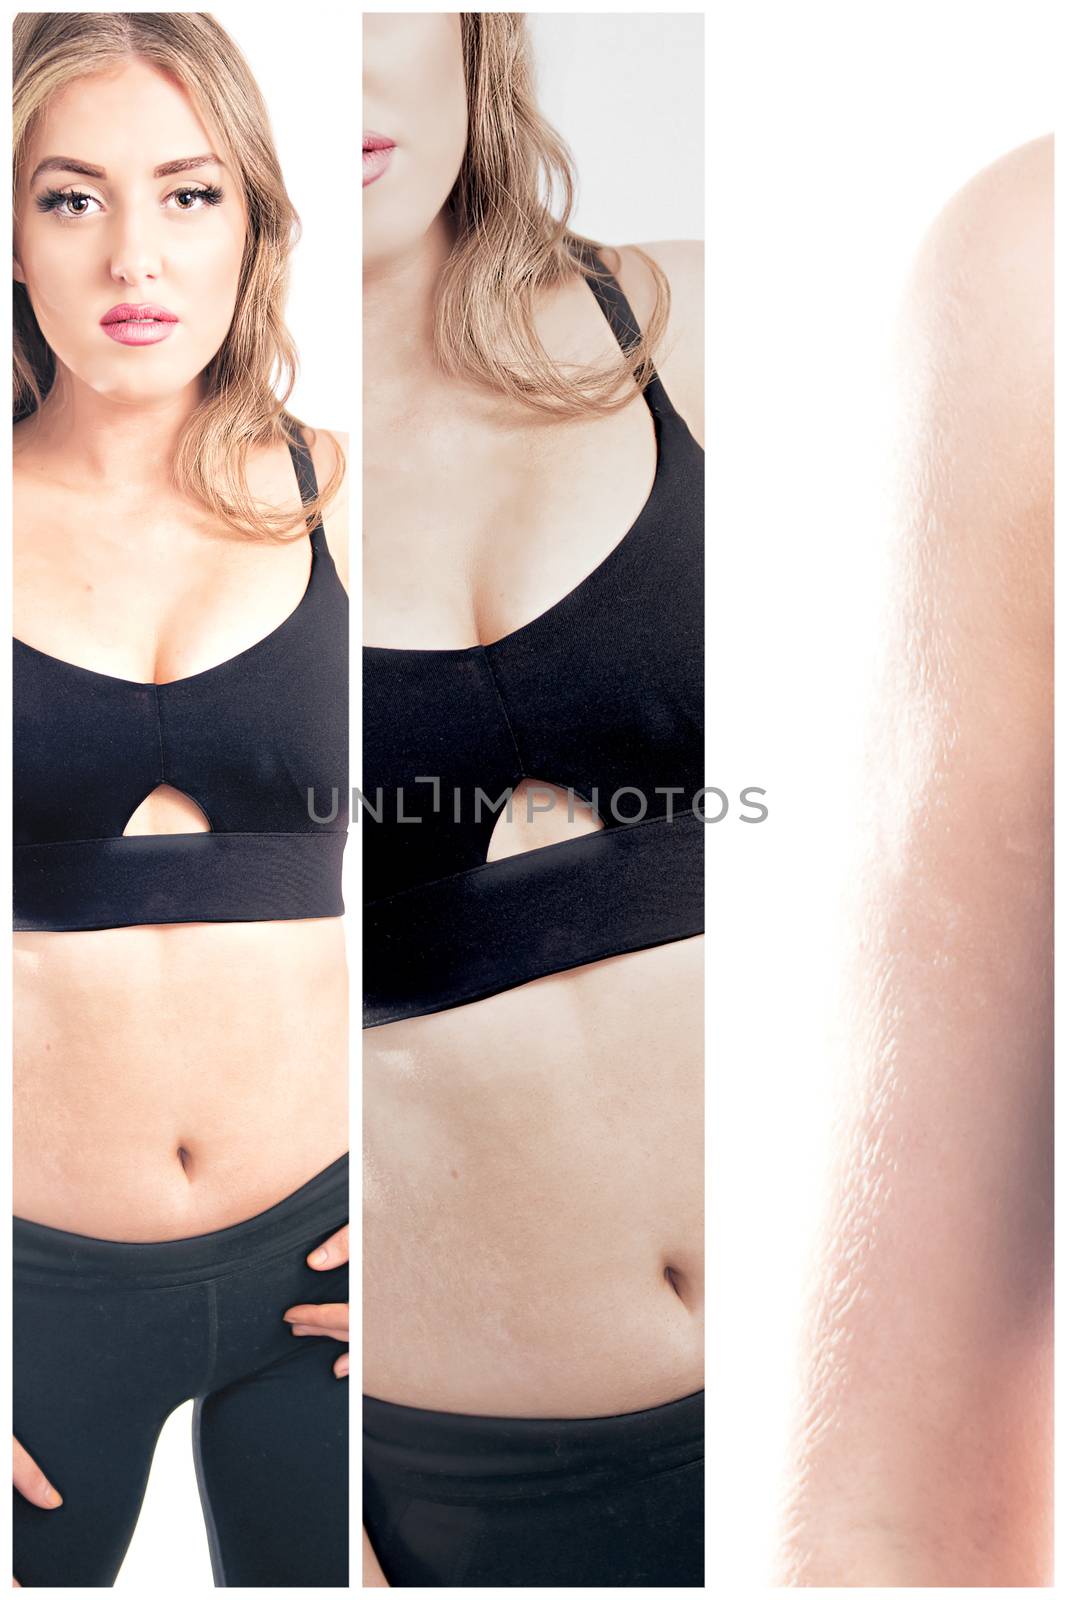 Female fitness model posing in studio. Cinematic Portrait Style with multi panel effect.